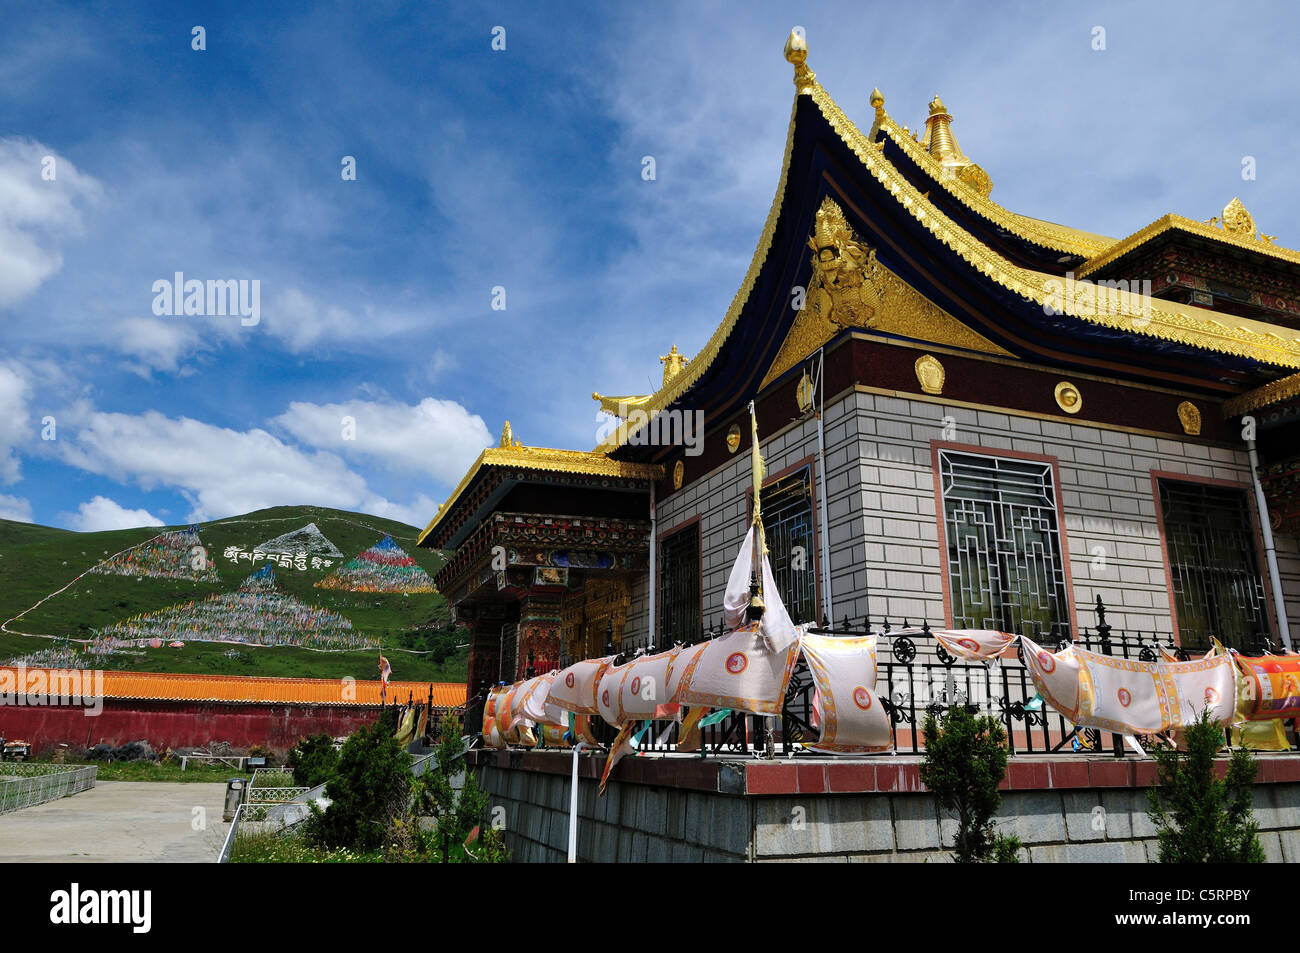 Tibetan Buddhist temple with golden roof. Tagong, Sichuan, China. Stock Photo